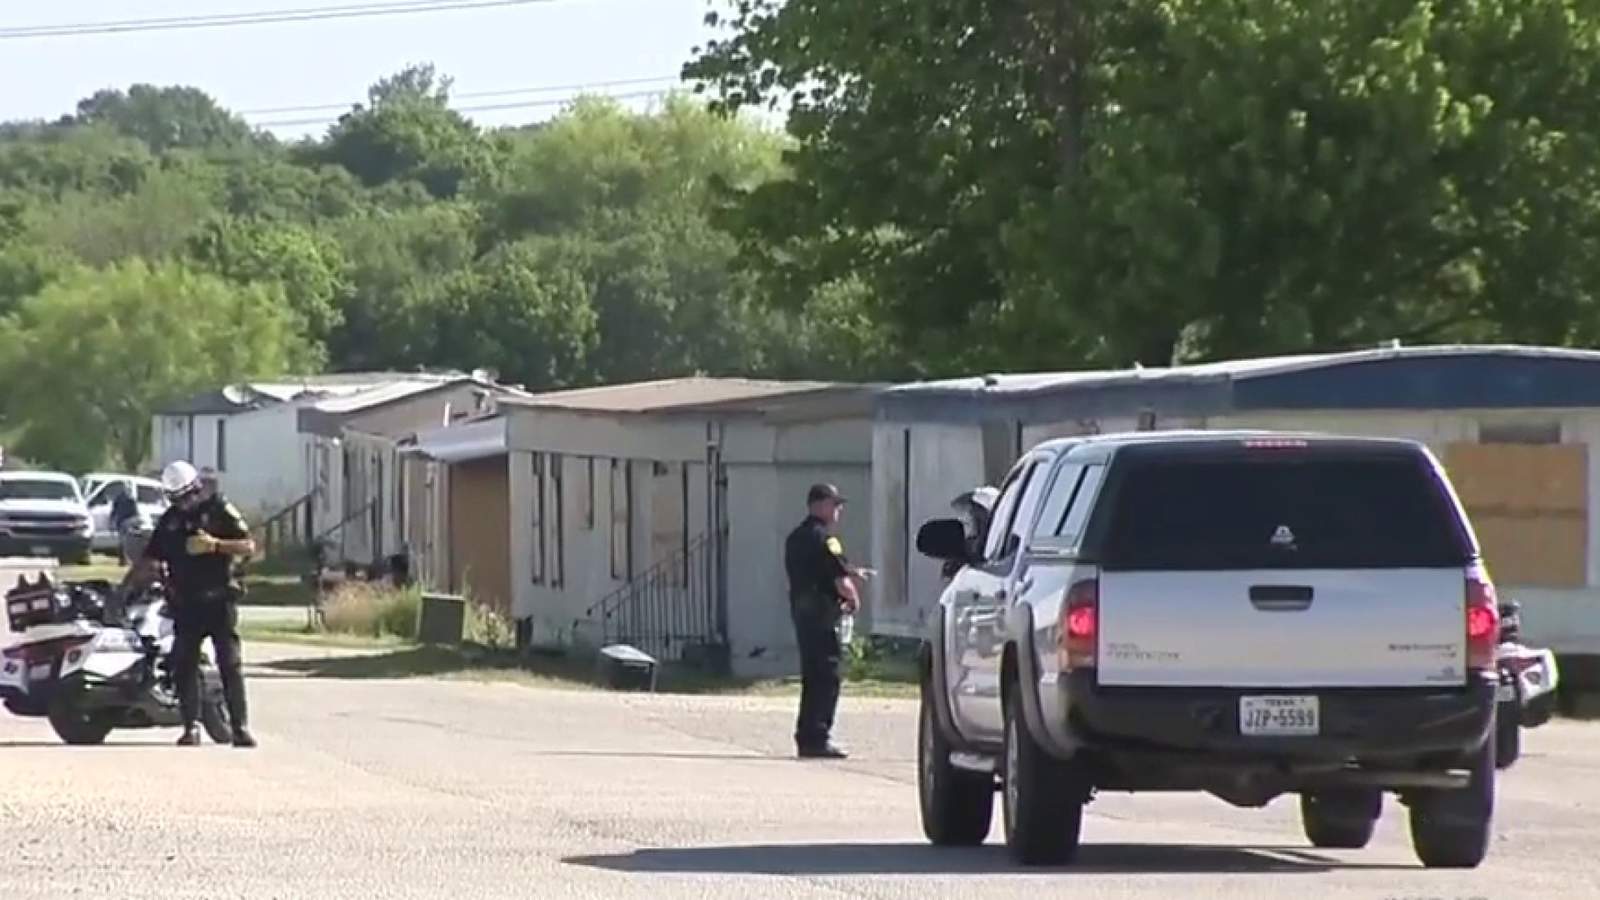 ‘We’re just prisoners of the trailer park’: Residents at Jasper Mobile Home Park fear for their safety